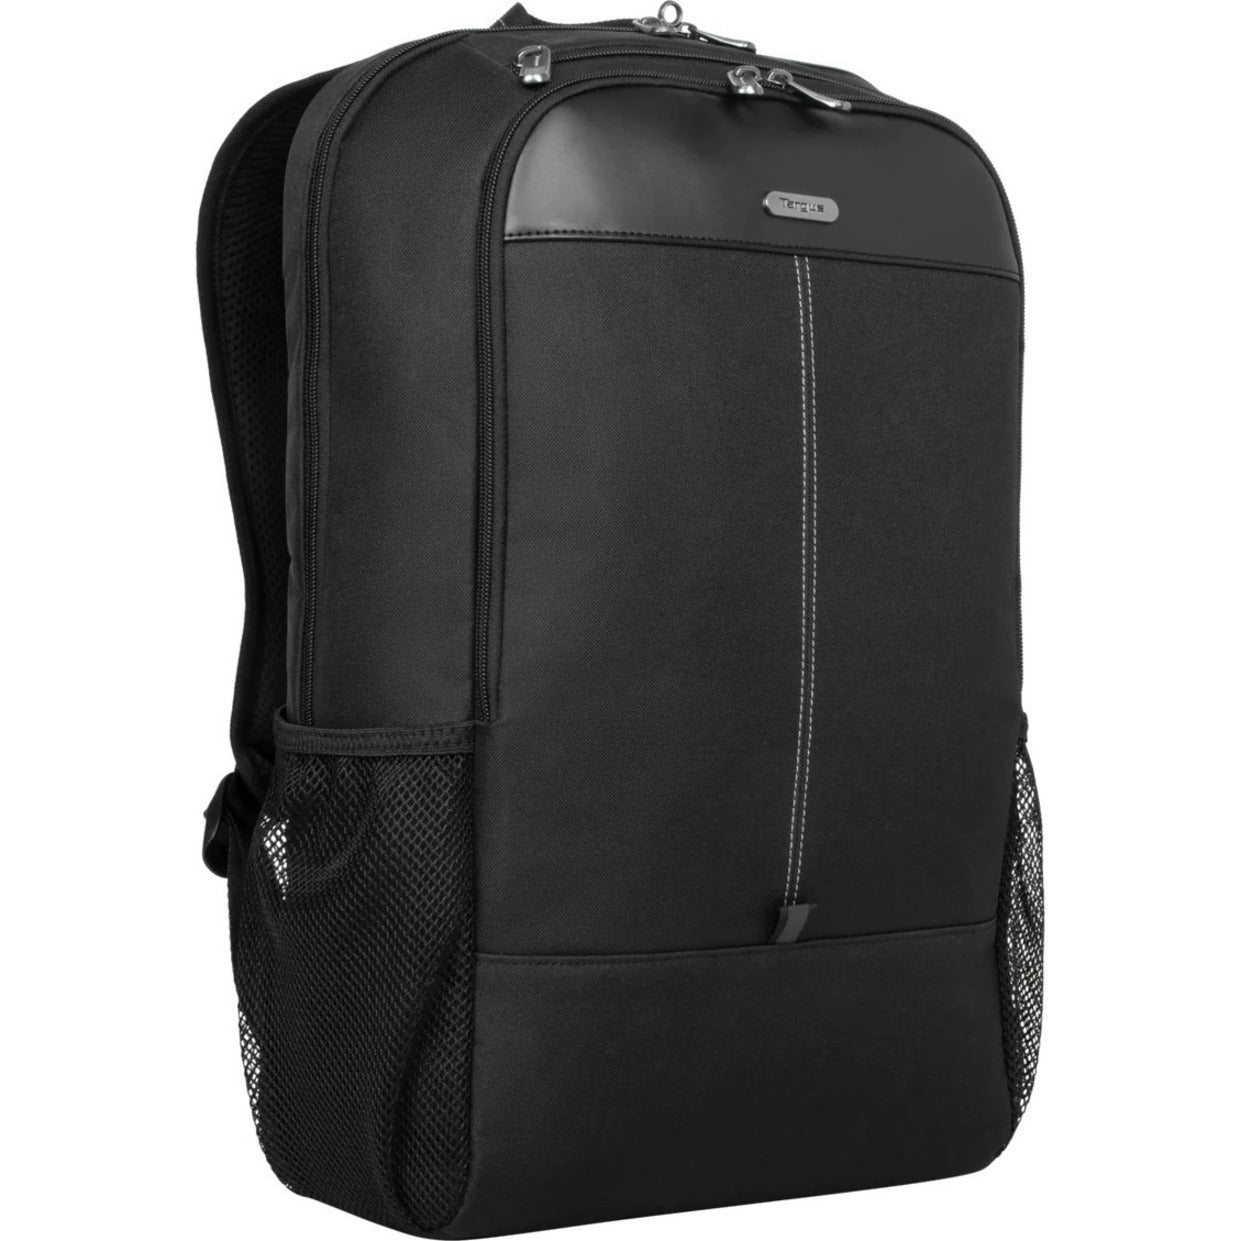 Targus TBB944GL 17.3" Modern Classic Backpack - Black, Carrying Case for Accessories, Smartphone, Notebook